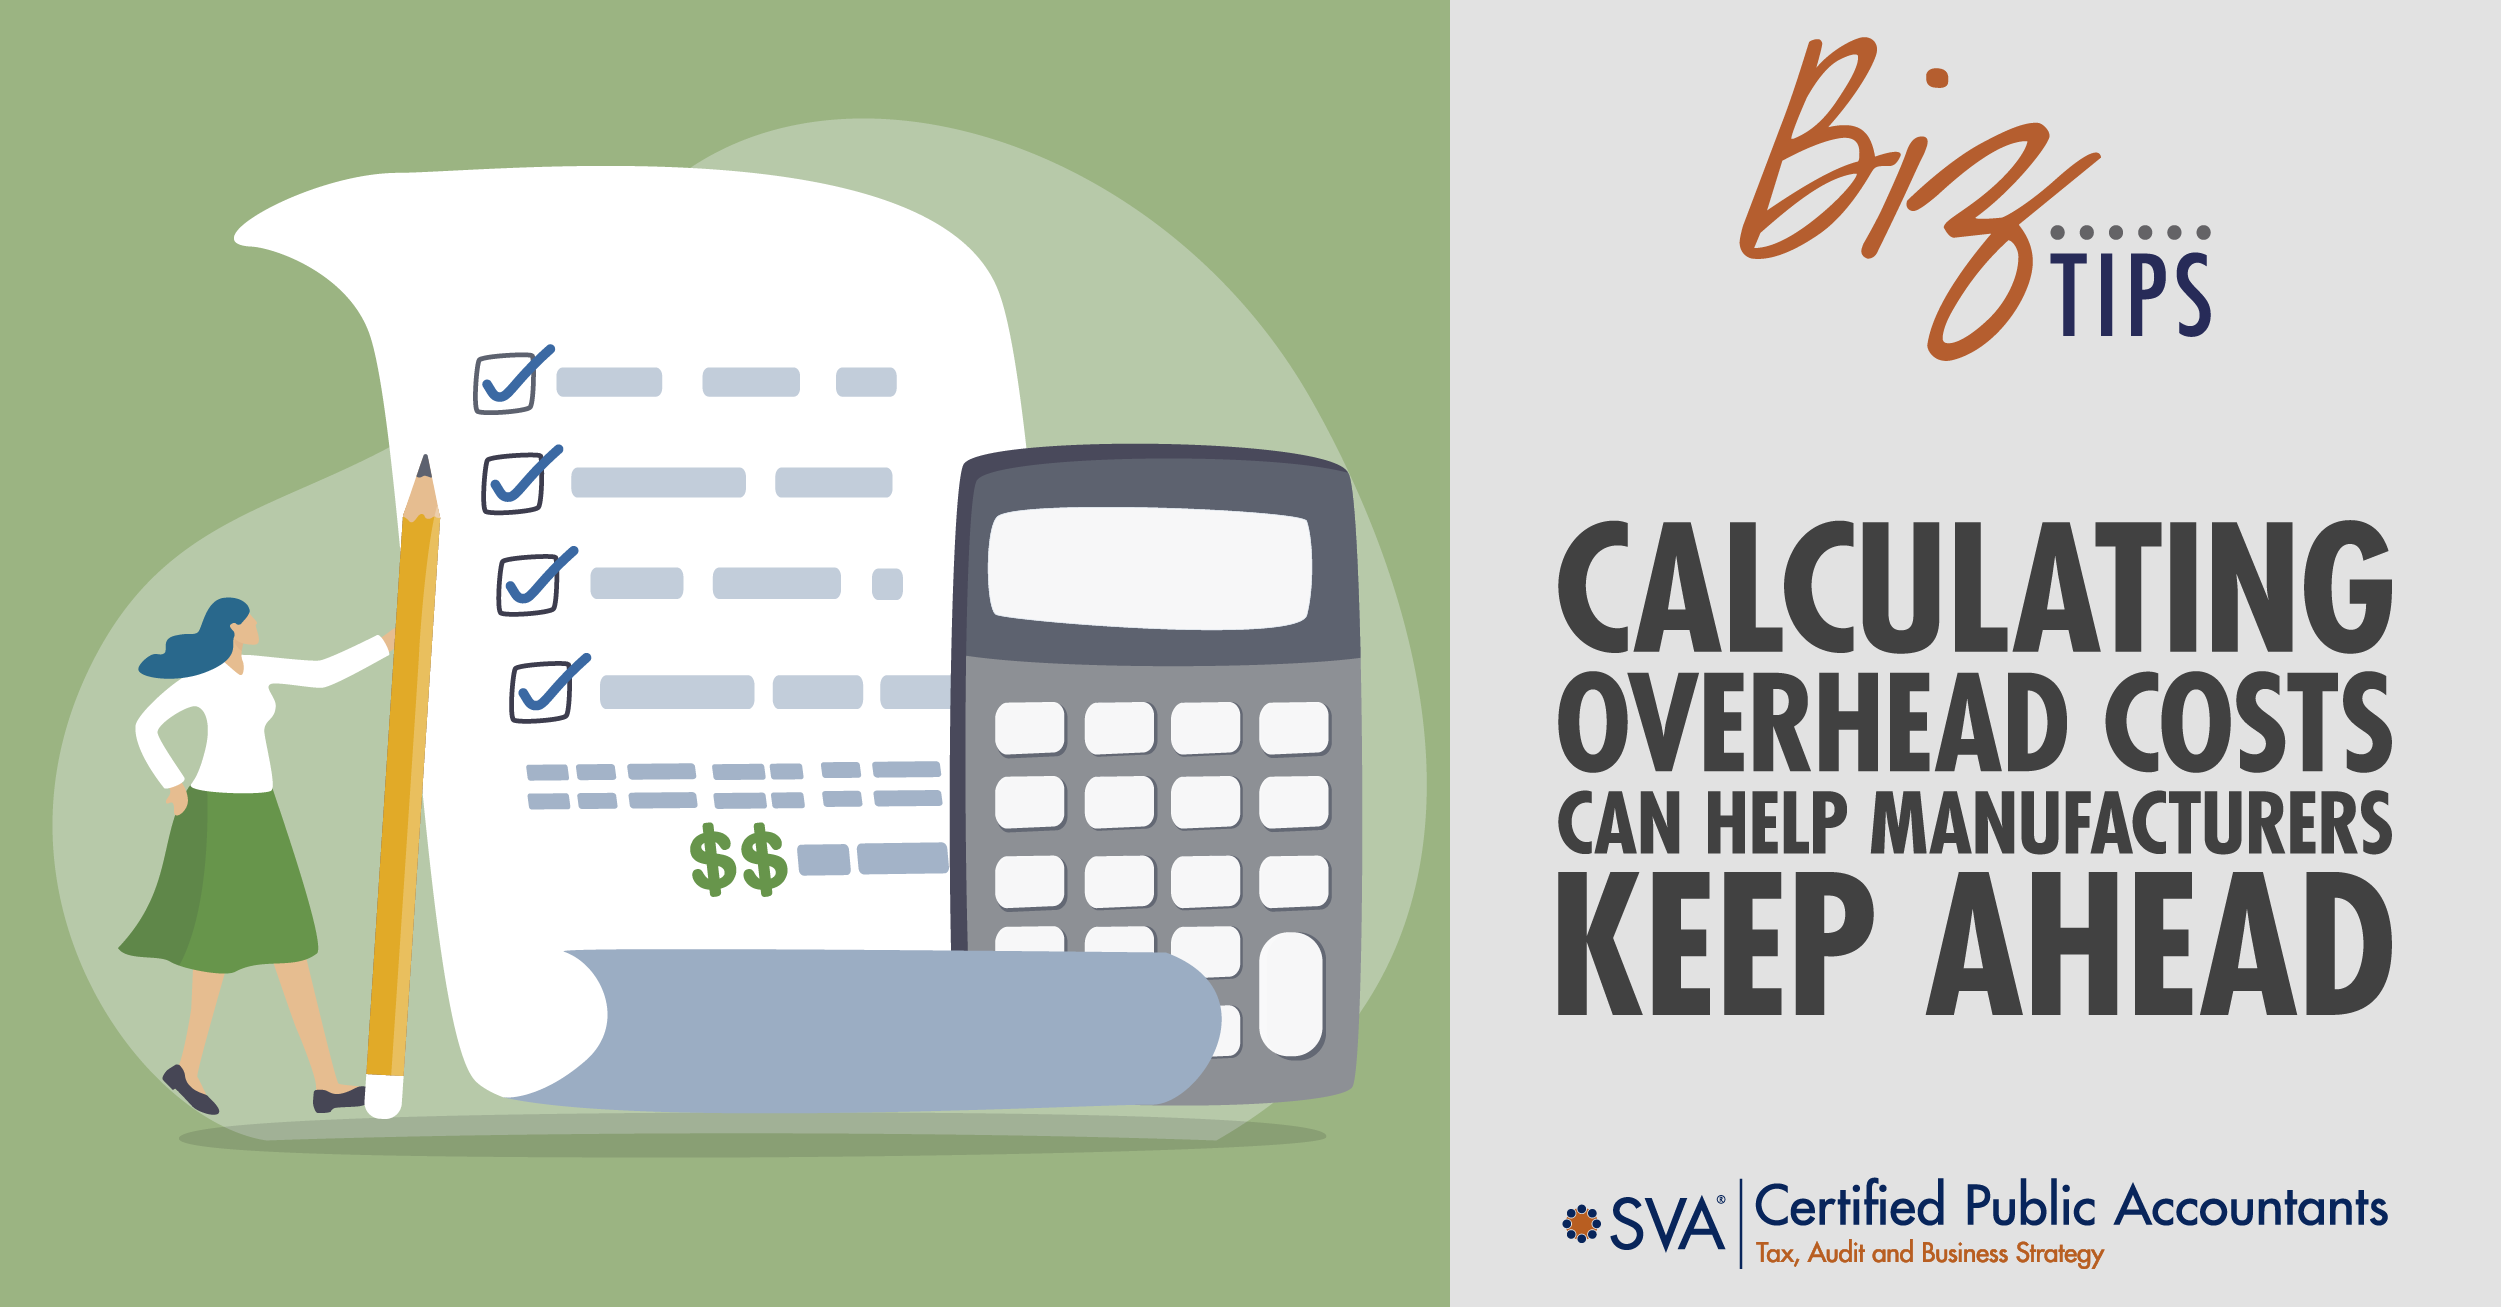 Calculating Overhead Costs Can Help Manufacturers Keep Ahead